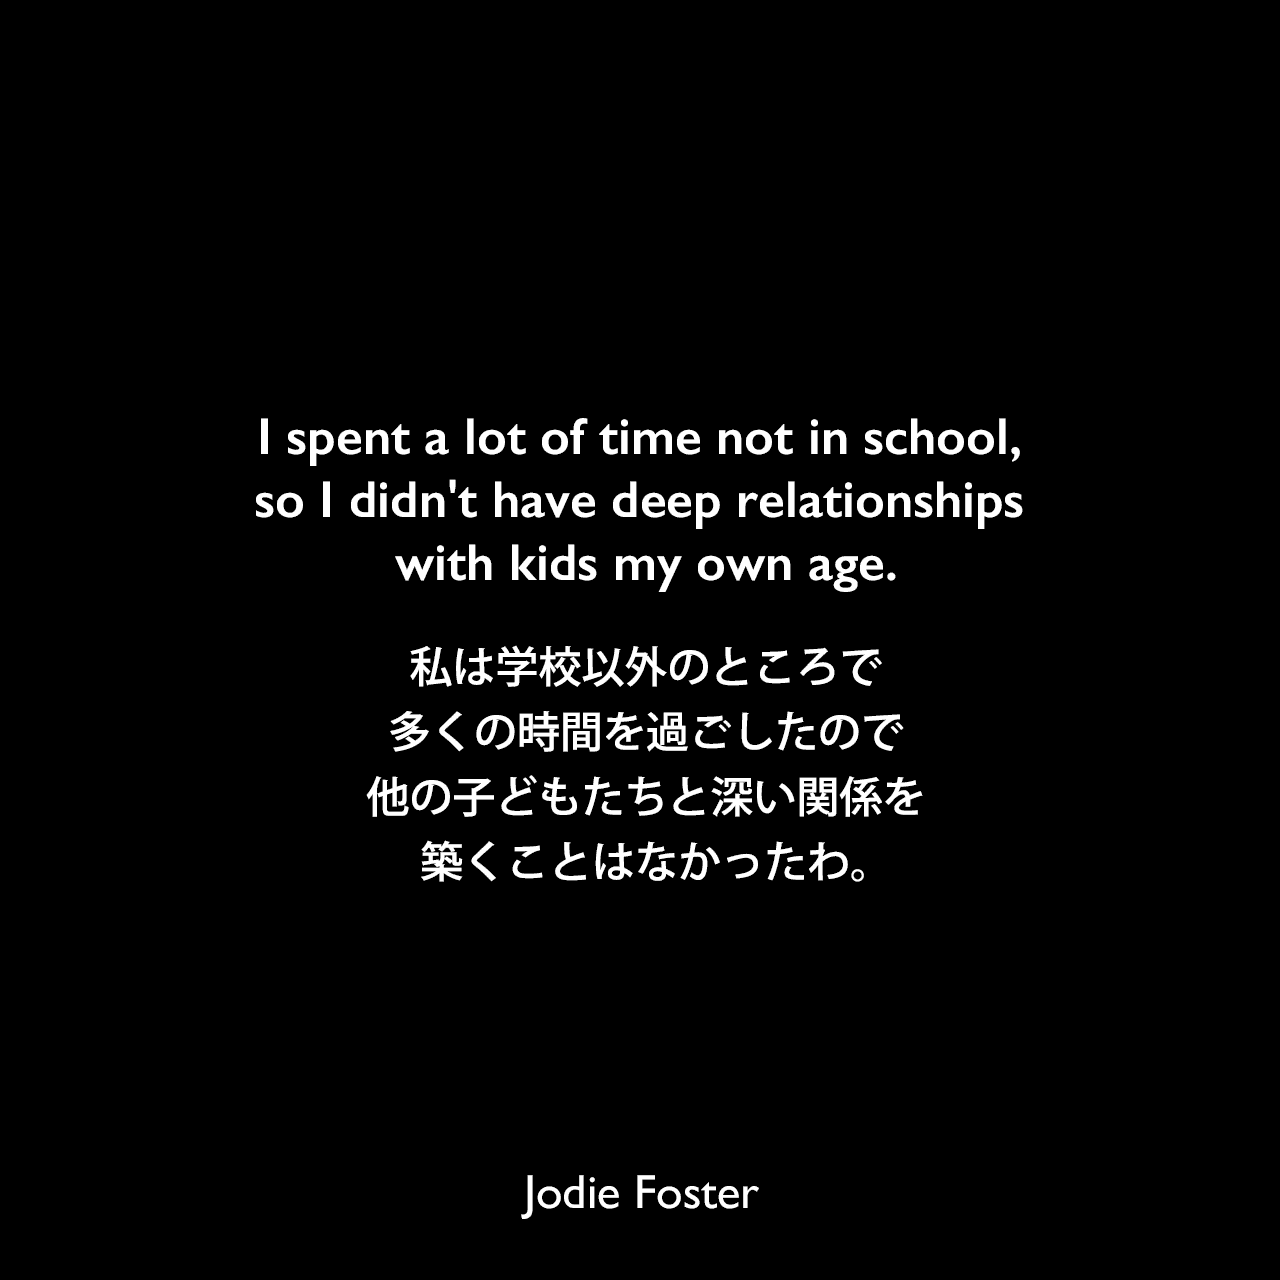 I spent a lot of time not in school, so I didn't have deep relationships with kids my own age.私は学校以外のところで多くの時間を過ごしたので、他の子どもたちと深い関係を築くことはなかったわ。Jodie Foster